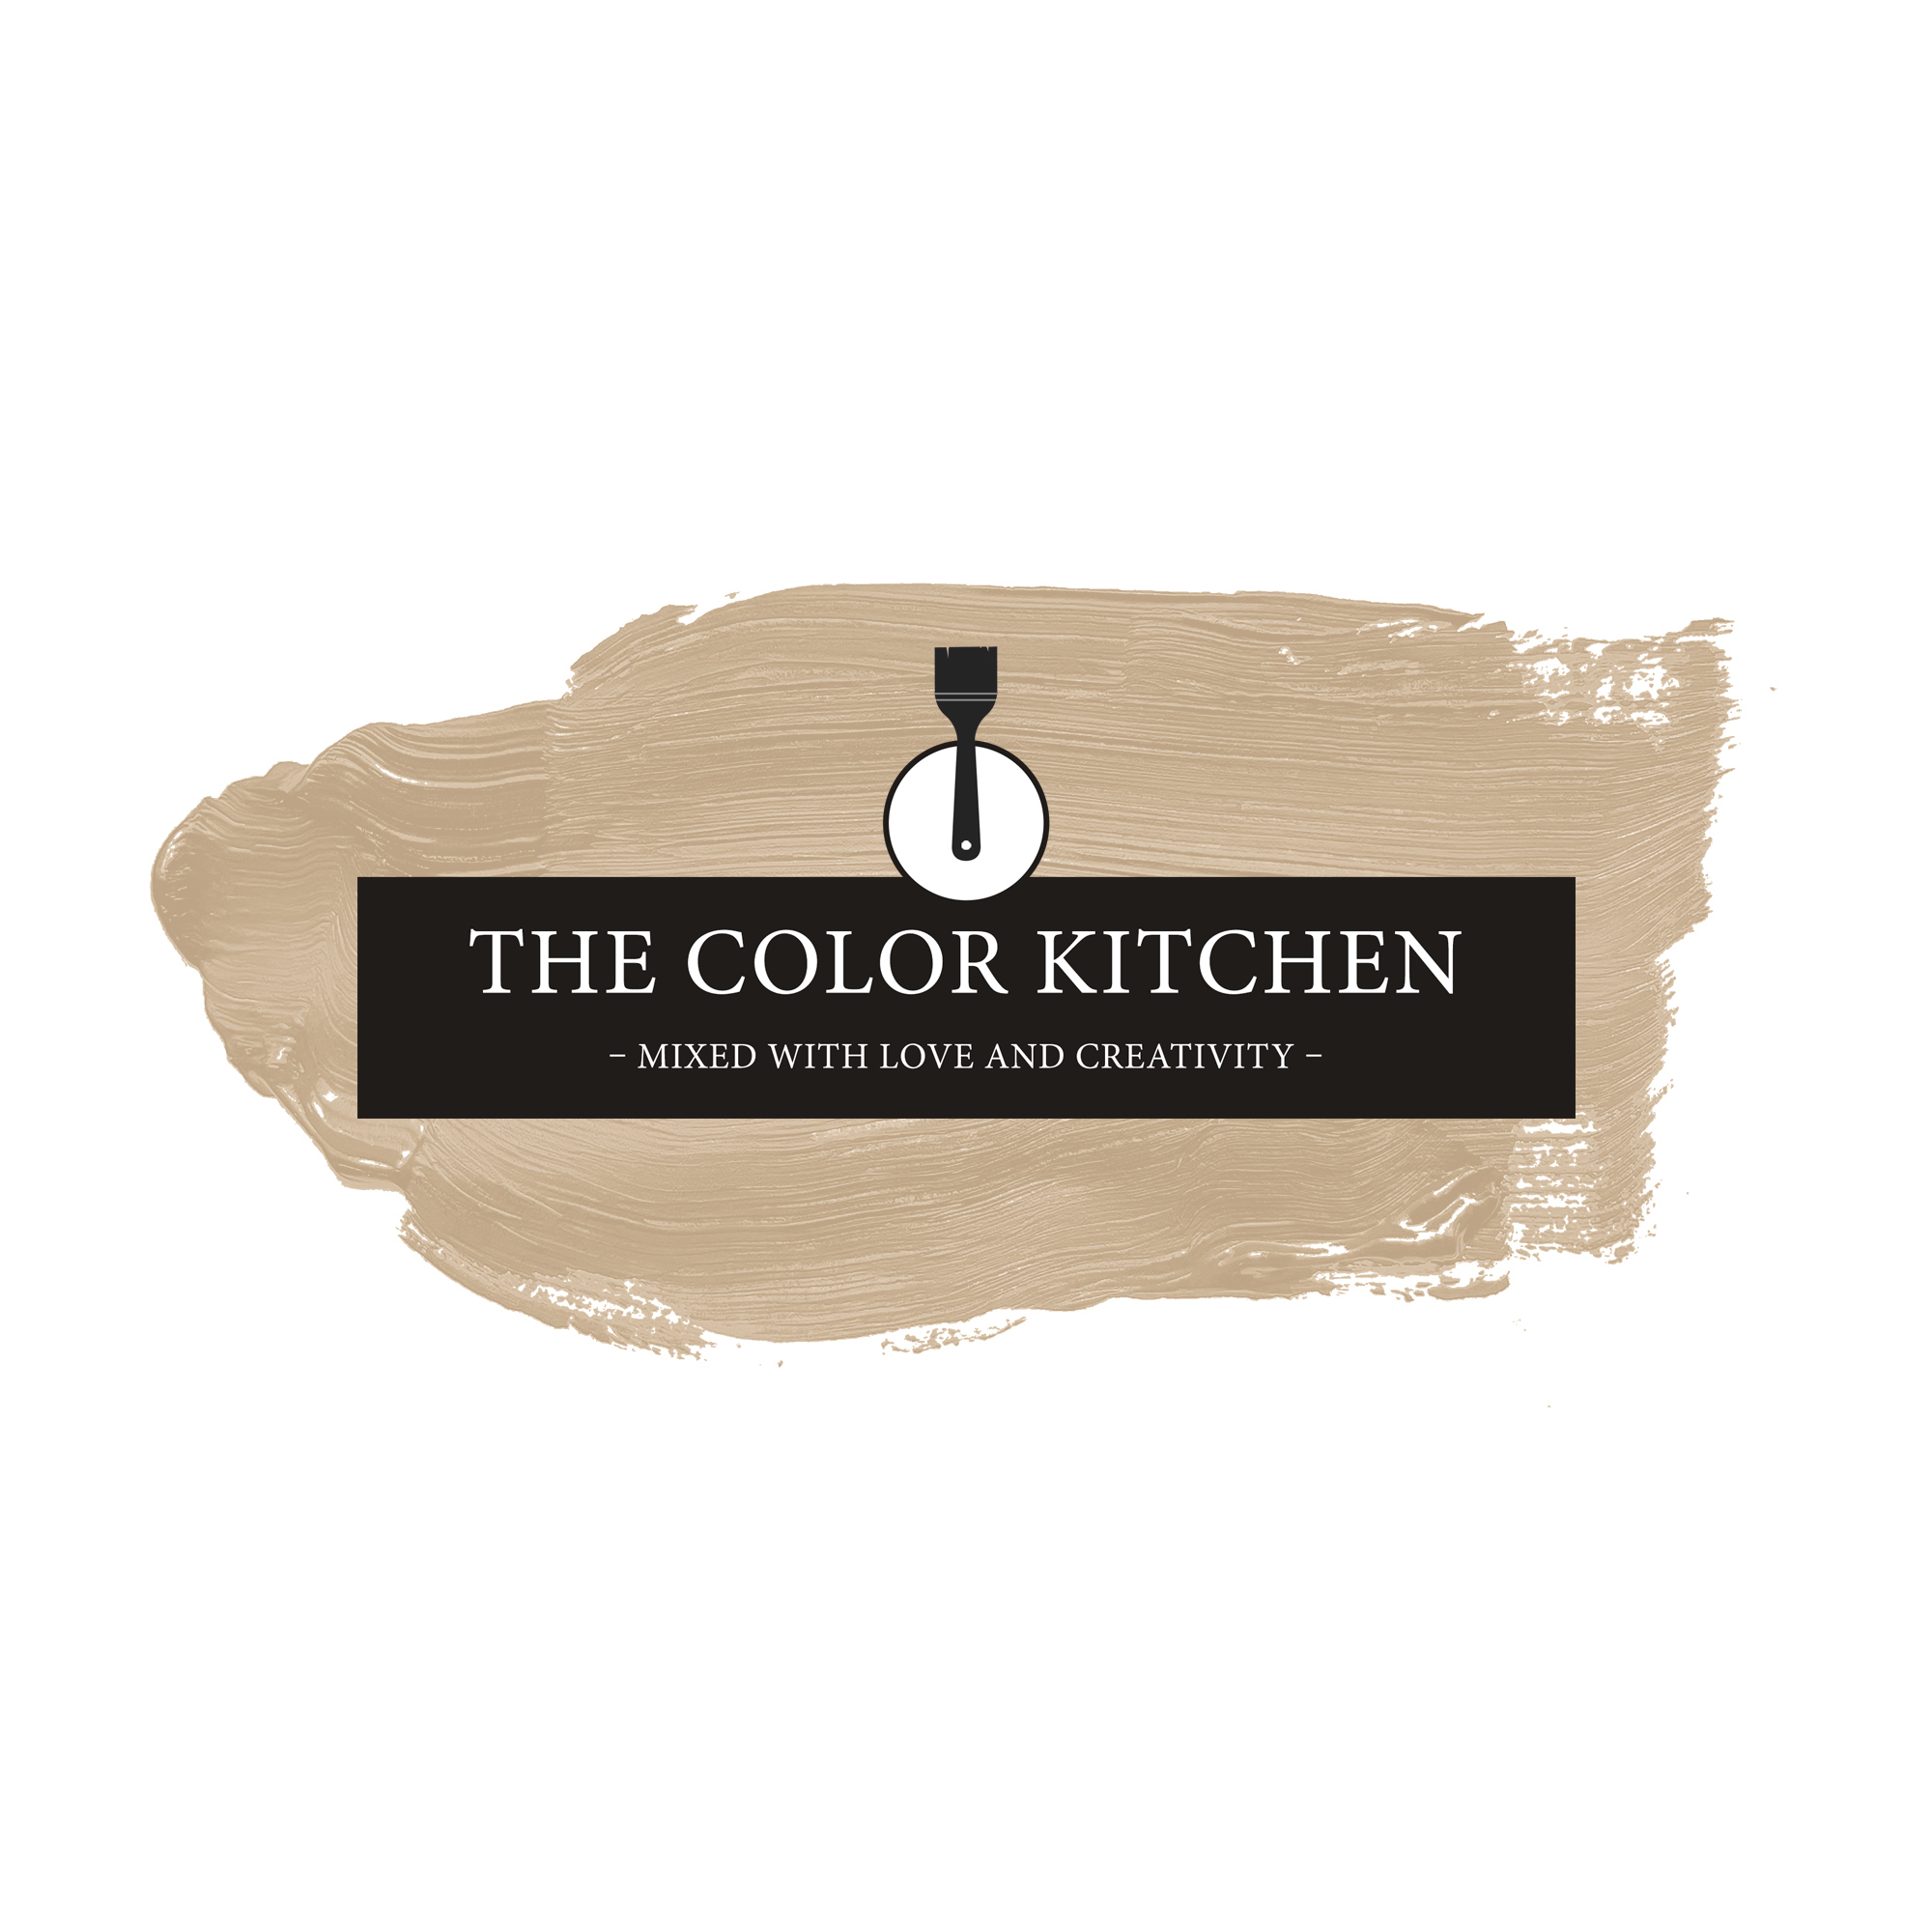 The Color Kitchen Flat White Coffee 2,5 l